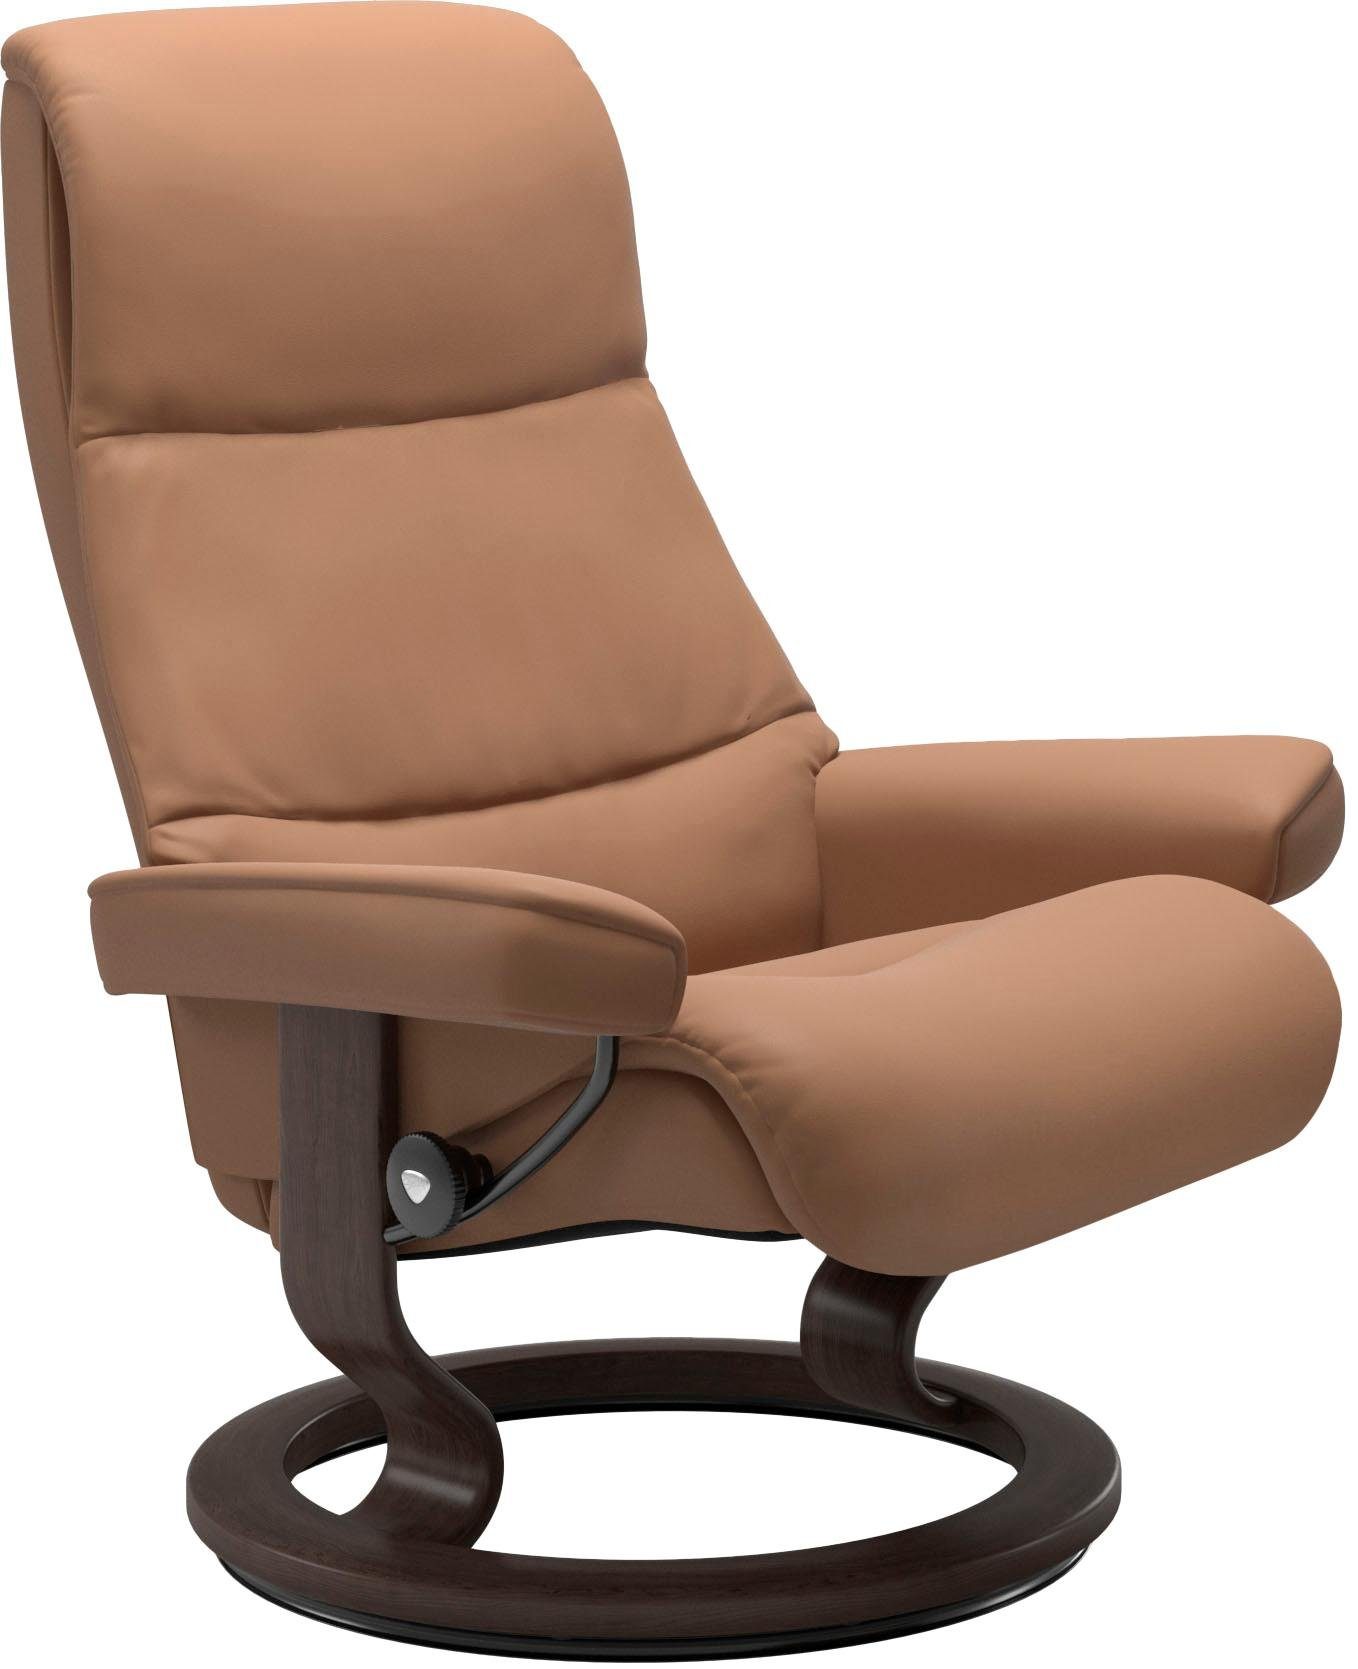 Base, Größe View, Relaxsessel Classic M,Gestell Wenge Stressless® mit